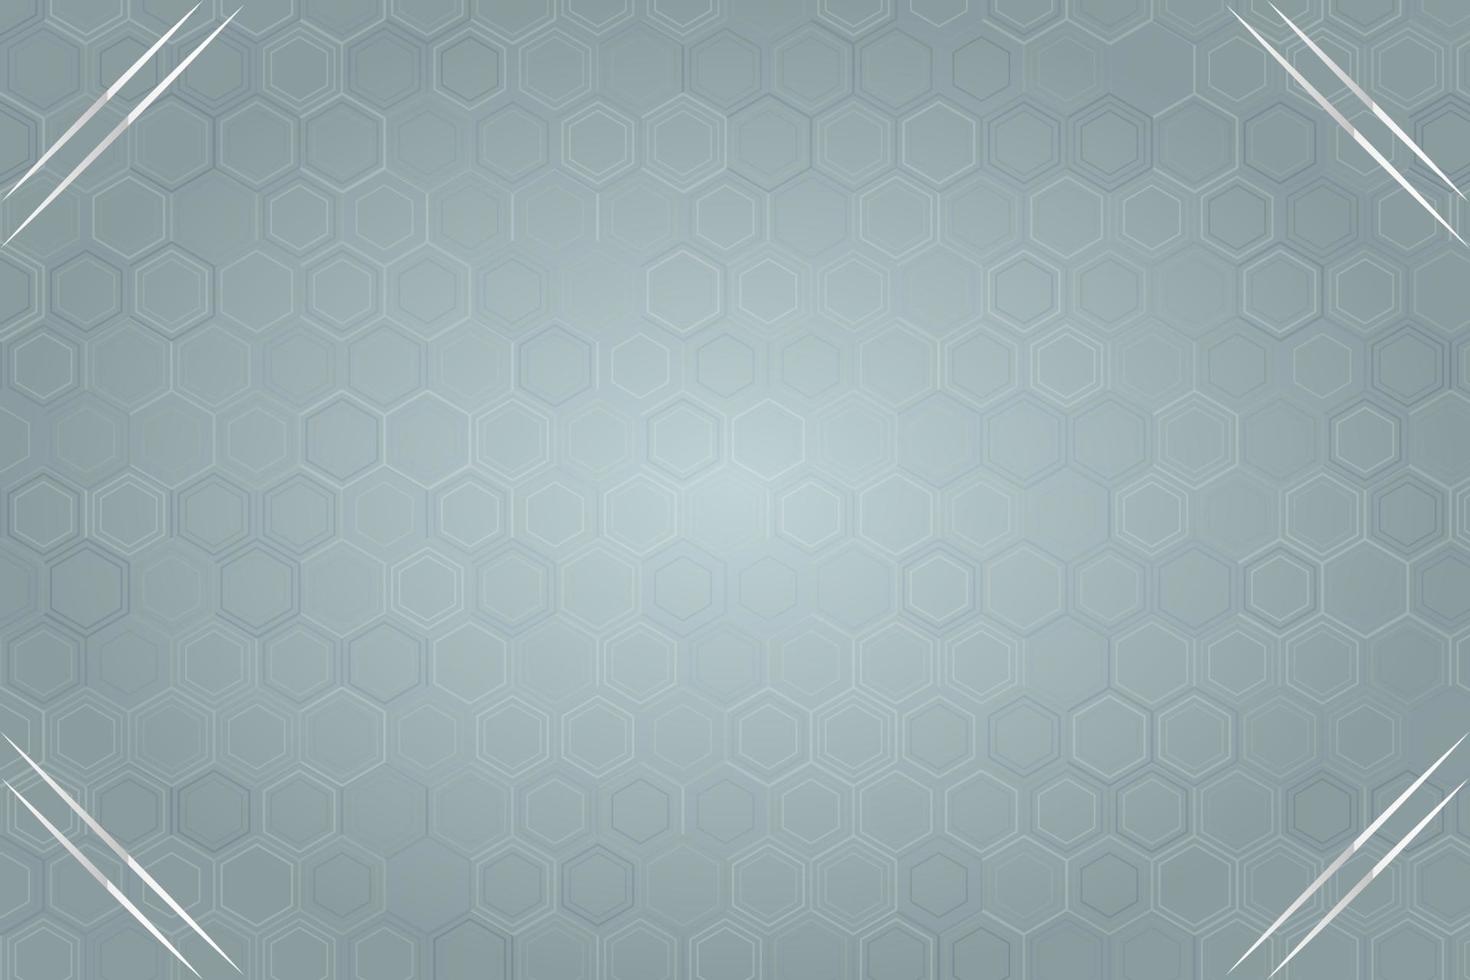 Modern luxury abstract background with golden line elements. modern gray background for design vector